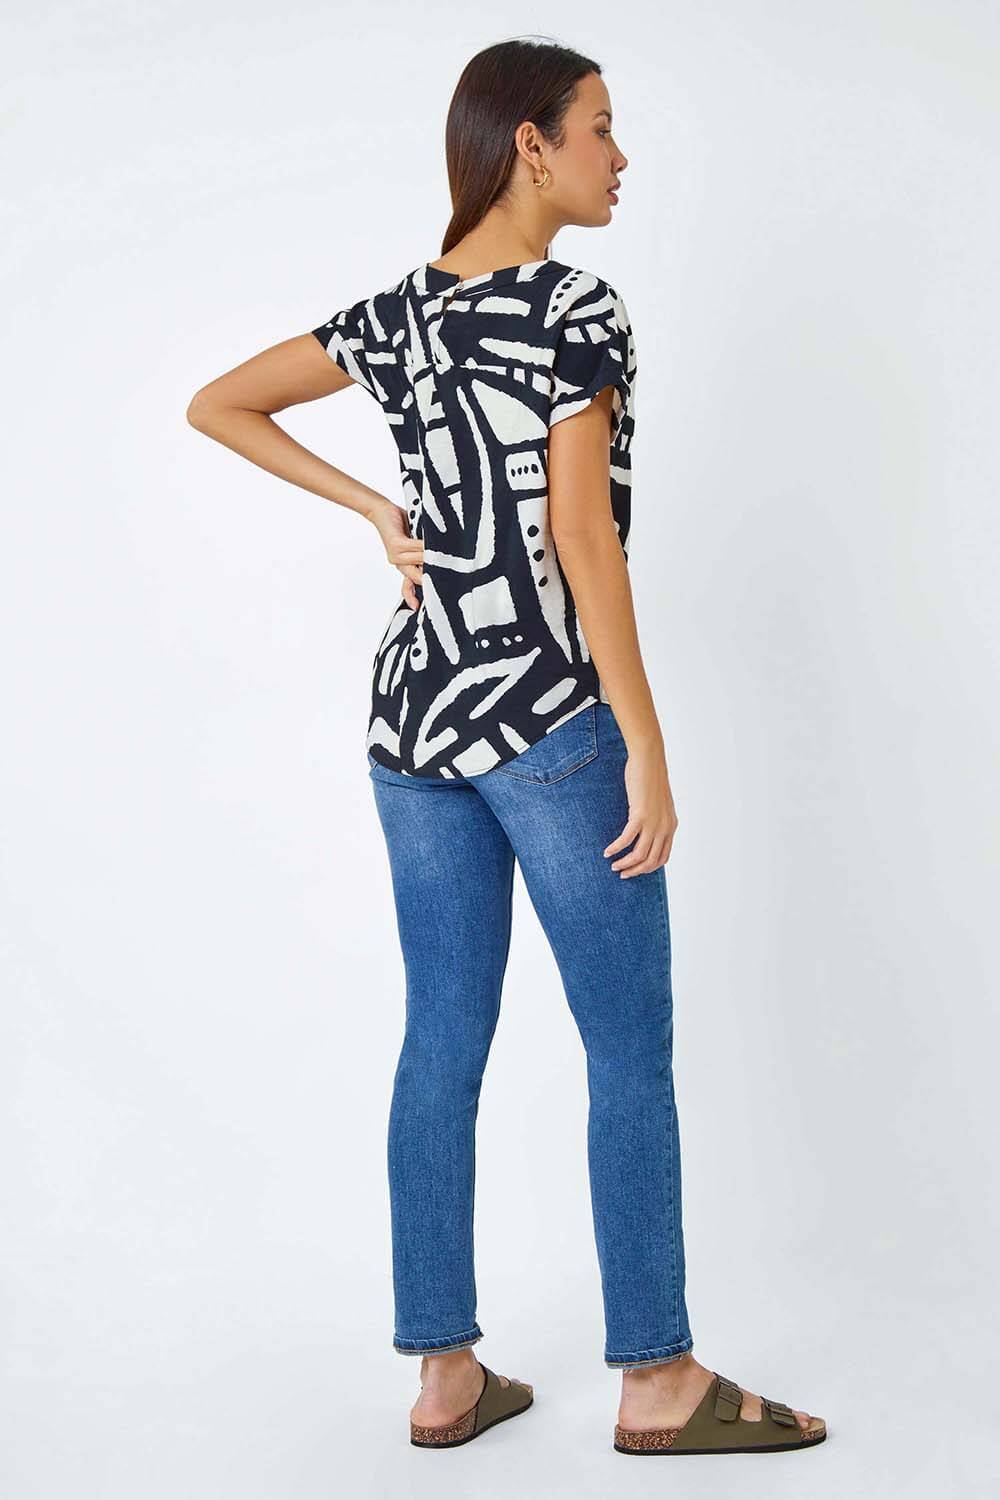 Black Contrast Abstract Print Top, Image 3 of 5